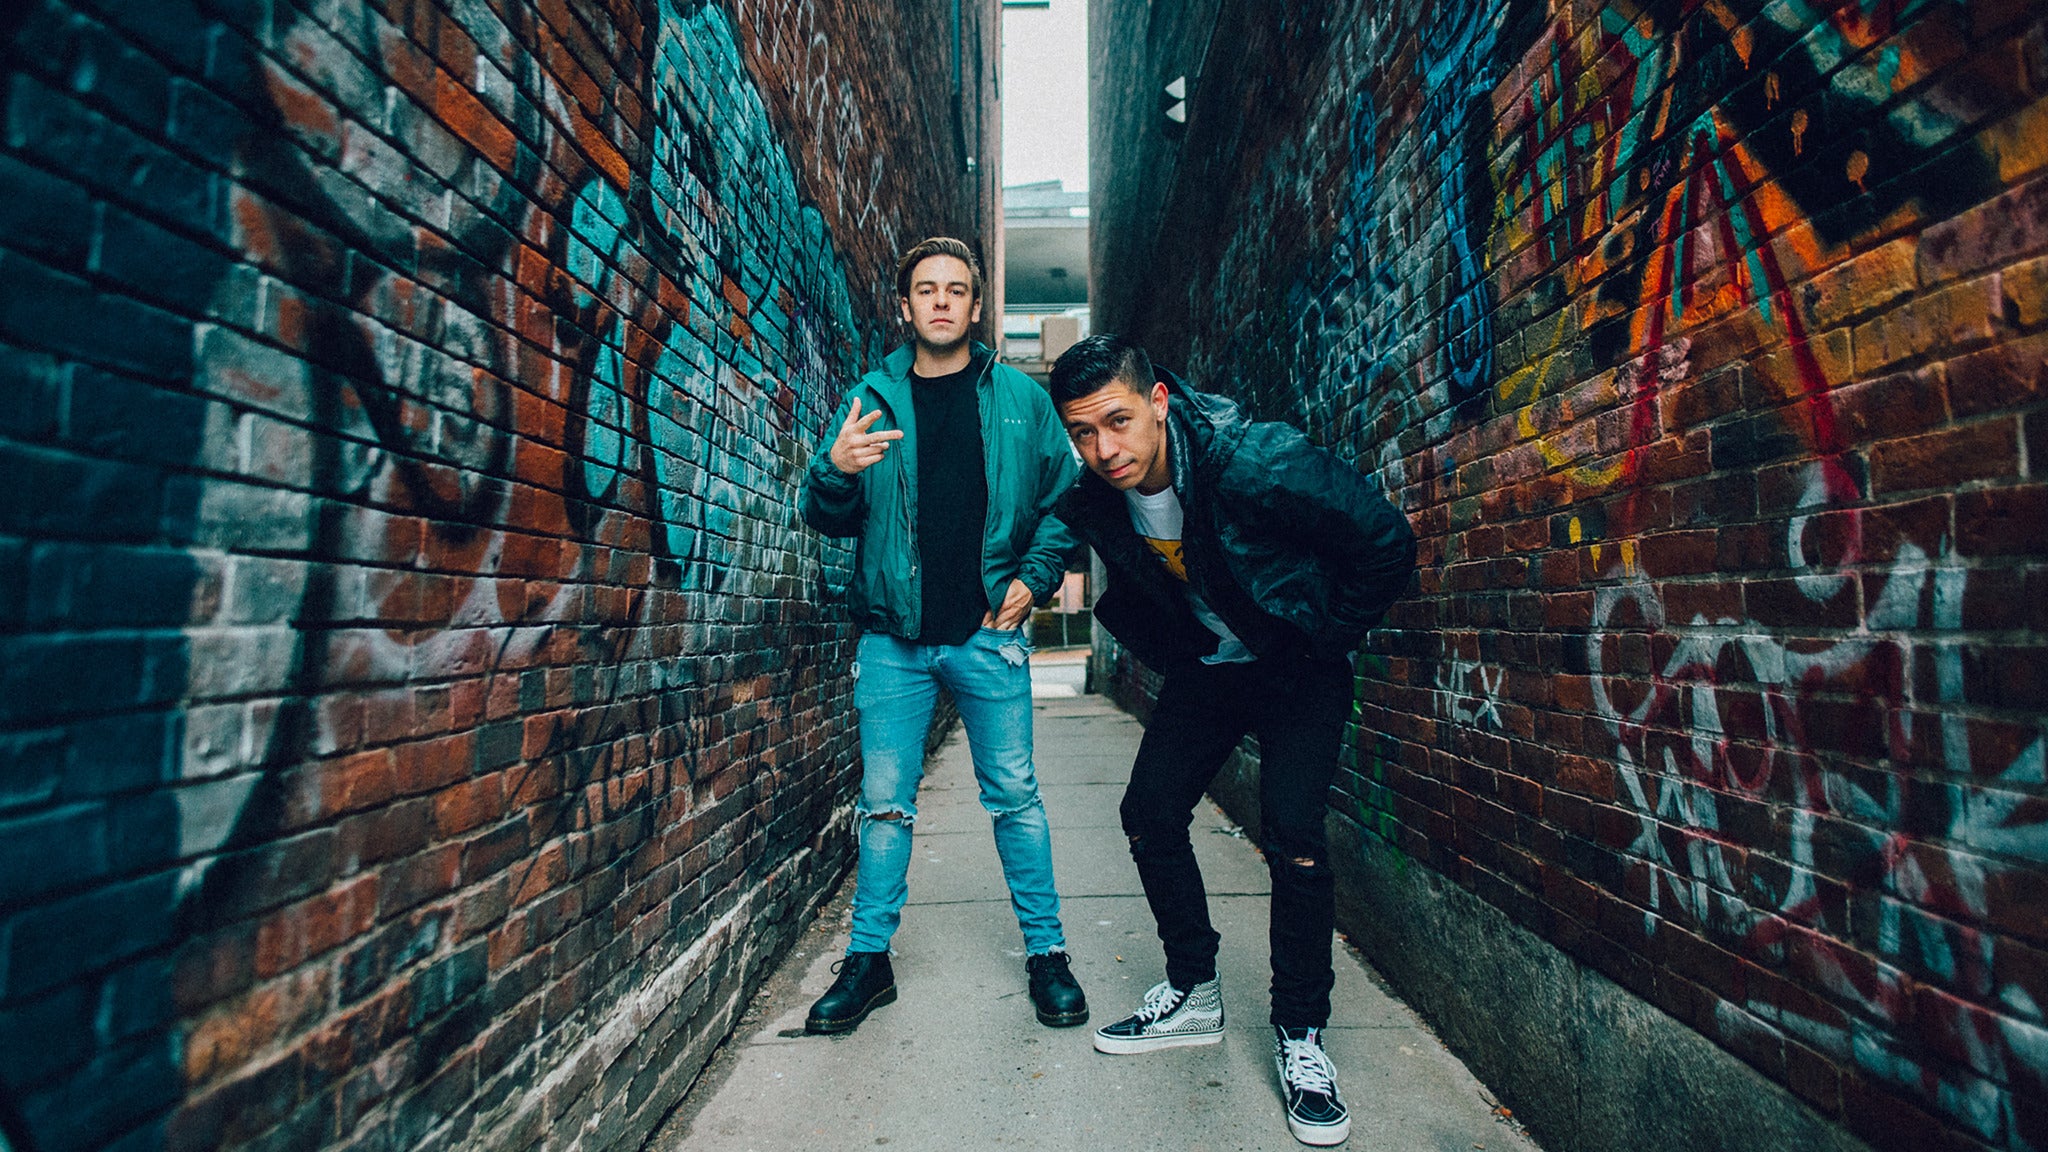 Cody Ko & Noel Miller: Tiny Meat Gang -The NYE Ball Dropper Show in Washington promo photo for Patreon presale offer code